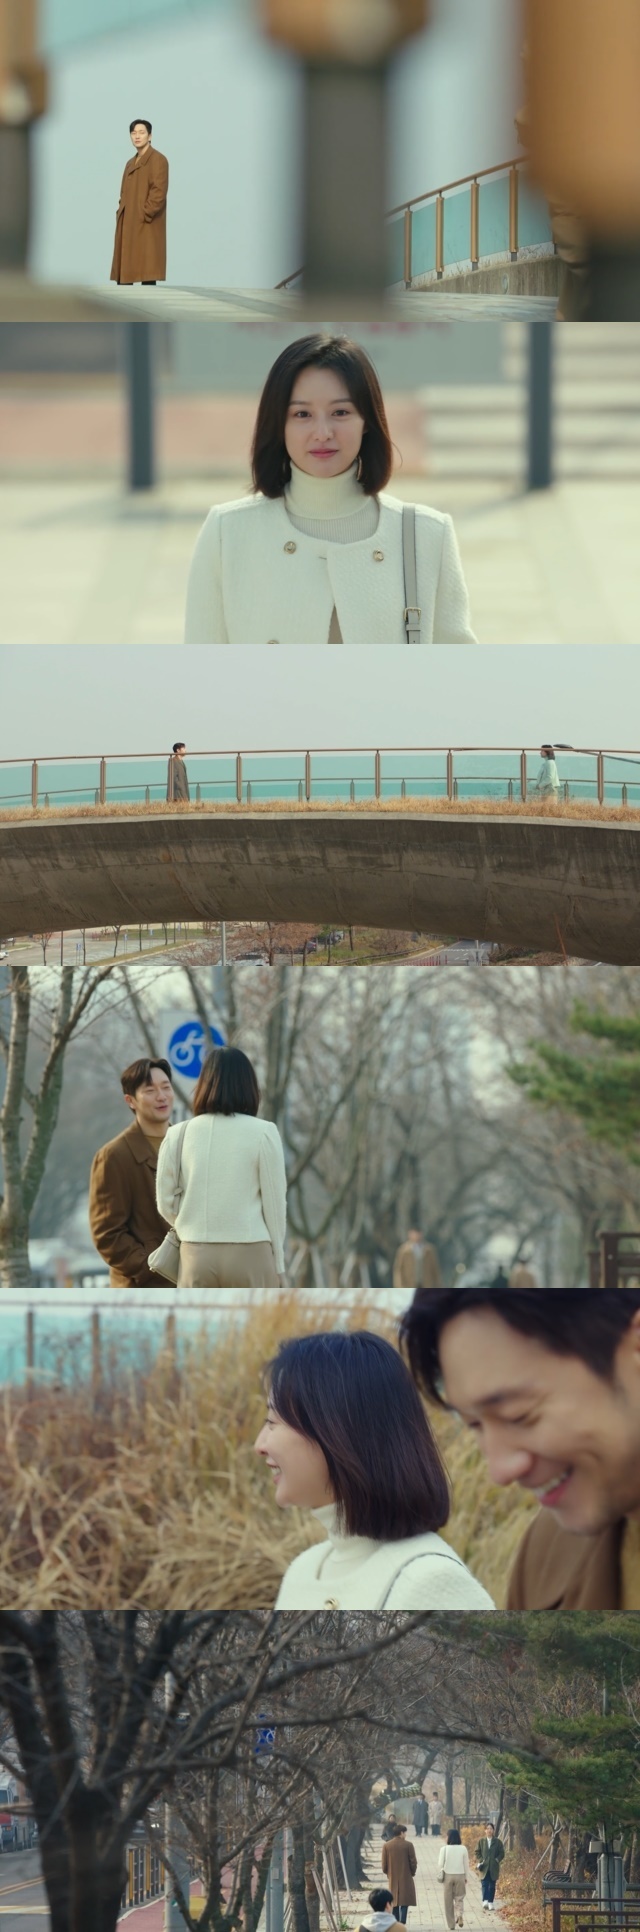 Son Seokgu and Kim Ji-won finally opened up the possibility of Happy Endings with The Slap.In the 14th JTBC Saturday drama My Liberation Diary (playplayed by Park Hae-young and directed by Kim Seok-yoon), which was broadcast on May 22, the recovery period of the Yeom family, who lost her mother Kwak Hye-sook (played by Lee Kyung-sung), was drawn.In The Funeral of her sudden death mother Kwak Hye-sook (Lee Kyung-sung), Sam Brother and Sister were in a fever, and her father, Yeom Je-ho (Chun Ho-jin), was in a mood.I also thought about death. Yeom Chang-hee (Lee Min-ki), who watched Kwak Hye-sooks makeup, said, Who is here when I am there?Ji Hyun-ah (Jeon Hye-jin) next to him replied, I will be there. So, Yeom Chang-hee gave Ji Hyun-ah a rather unromatic proposal, saying, Lets get married. Back home with her mothers ashes, Brother and Sister found her trails while they were clearing the house for days.The bottom of the rice that my mother had not worn until she died, the clothes of her mother buried in the pile of laundry, the shoes of her mother on the porch, and the fifty side dishes she had made.The sad Yeom family was silent, and only the sound of TV filled the house.In this process, it was revealed why the life of Yeom Family became more destitute.My aunt has approached me with a side dish that I do not like even by Yeom Je-ho as an excuse for the situation. I went to Wangsimni and got anchovy fried?If you do not have affection, why do you pretend to live without affection? I think you are going to oil it to talk about money again. I will squeeze it out.If we are robbed by Aunt Father again, we are all done, he warned. Its Family and I do not see Father.But during this fight, suddenly, her ashes made a clatter of sound, like the life of her mother, who stopped Familys disturbance.In the meantime, the incident occurred to Yum Mi-jung, who was the backbone of the fact that Choi Jun-ho (Lee Ho-young) had stored the number of the in-house affair woman under the name of Yum Mi-jung.Choi Jun-hos wife called the company and found Yum Mi-jung, and Yum Mi-jung, who received the call, said, I am not.I have only saved my name in my name. On the spot, I called Baro Choi Jun-ho and confirmed his real name.Then, to his wife, I am a parenthesis and a contract worker.Even Yeom Mi-jung knew the identity of Choi Jun-hos real affair woman, Han Soo-jin (a craft magazine) who was a close associate of Baro.He comforted himself with his Shichimi, and he gave back his anger and anger by hitting Han Soo-jin, who knows who the affair is, with his bag.However, it was regrettable that only the contract worker, Yum Mi-jung, would be difficult to convert to full-time employees.In addition, Yeom Mi-jeong also learned that he took money from his ex-boyfriend to Family by taking out a loan of 2 million won in settlement.The Yeom family, however, has overcome the wounds with a firmness, especially Yeom Chang-hee, who has been standing by Yeom Je-ho, who does not know how to produce sadness.With Yeom Chang-hee as the head of the family, the family united and cursed her aunt as the Villan of Family, and talked about the future of each other becoming the aunts uncle of each others children.When he heard the old familys overcoming period, he returned to the dissemination, and then he called the new number of the new one, which he received from the Yeomjeho.Did you meet the man who admires you? He asked me recently, laughing at the word that he had no lover and asked, Lets see. 